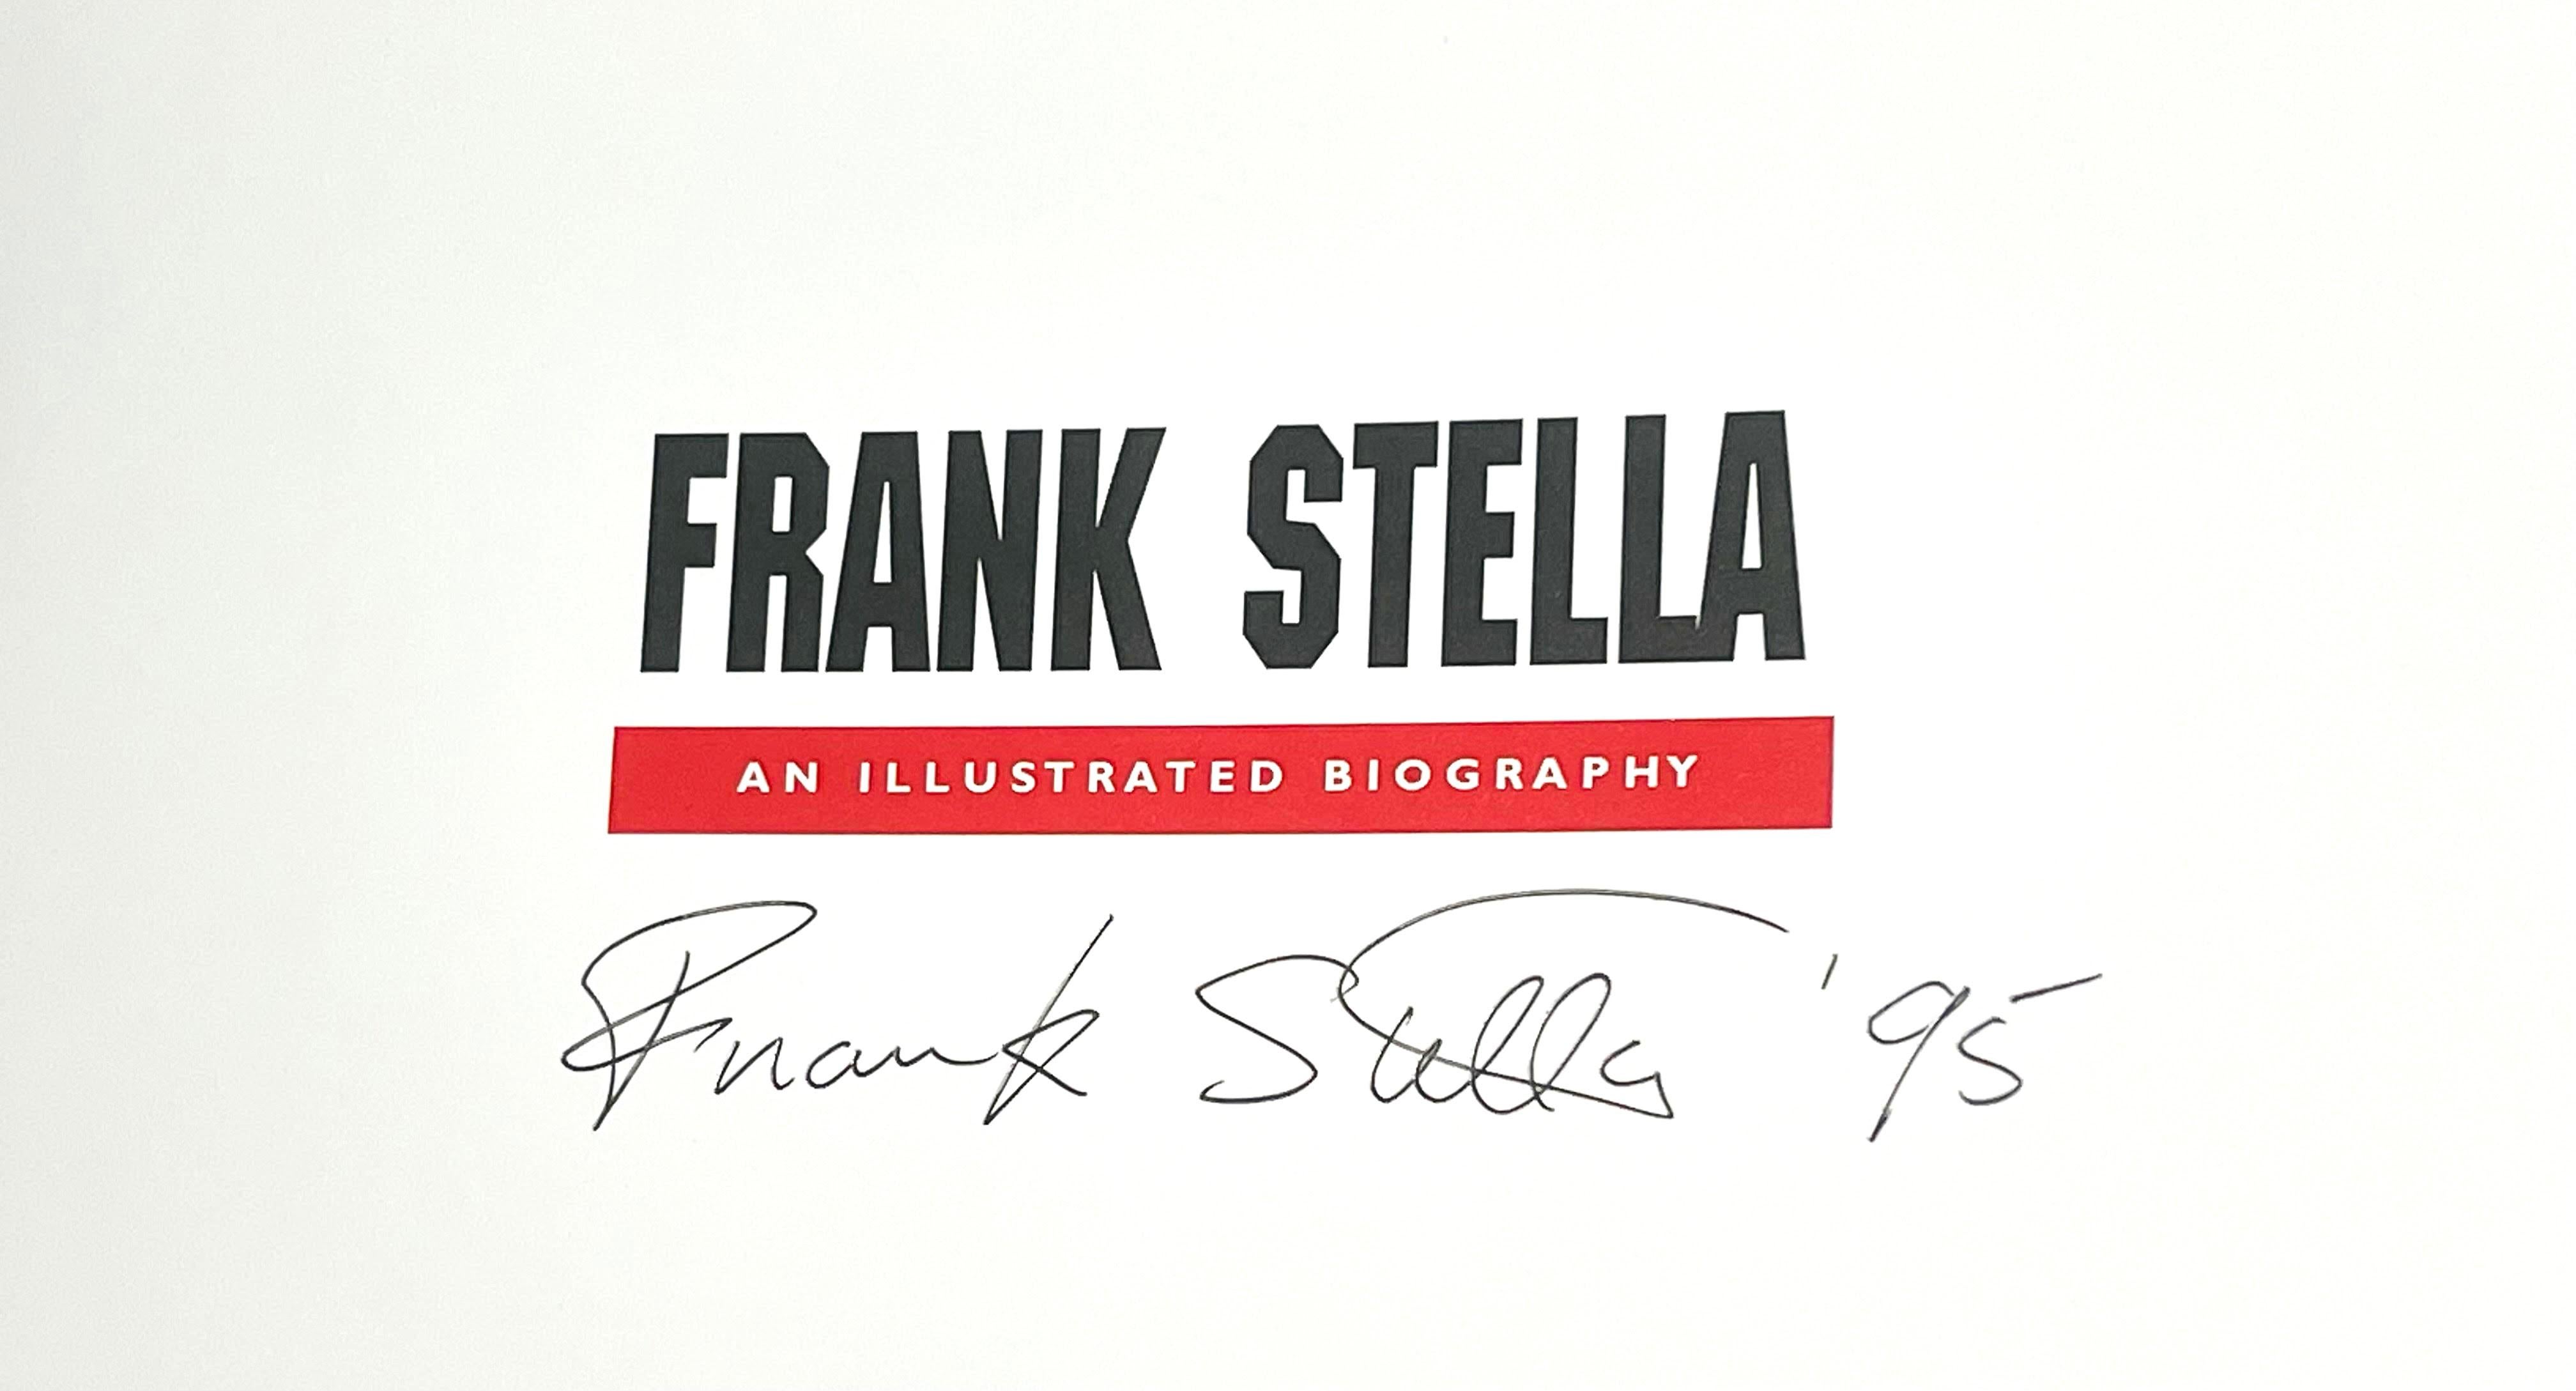 Frank Stella; An Illustrated Biography (Hand signed and dated by Frank Stella), 1995
Hardback monograph (hand signed and inscribed on the title page)
Hand signed and dated by Frank Stella on the title page
12 1/4 × 9 1/2 × 1 inches
Unframed
This